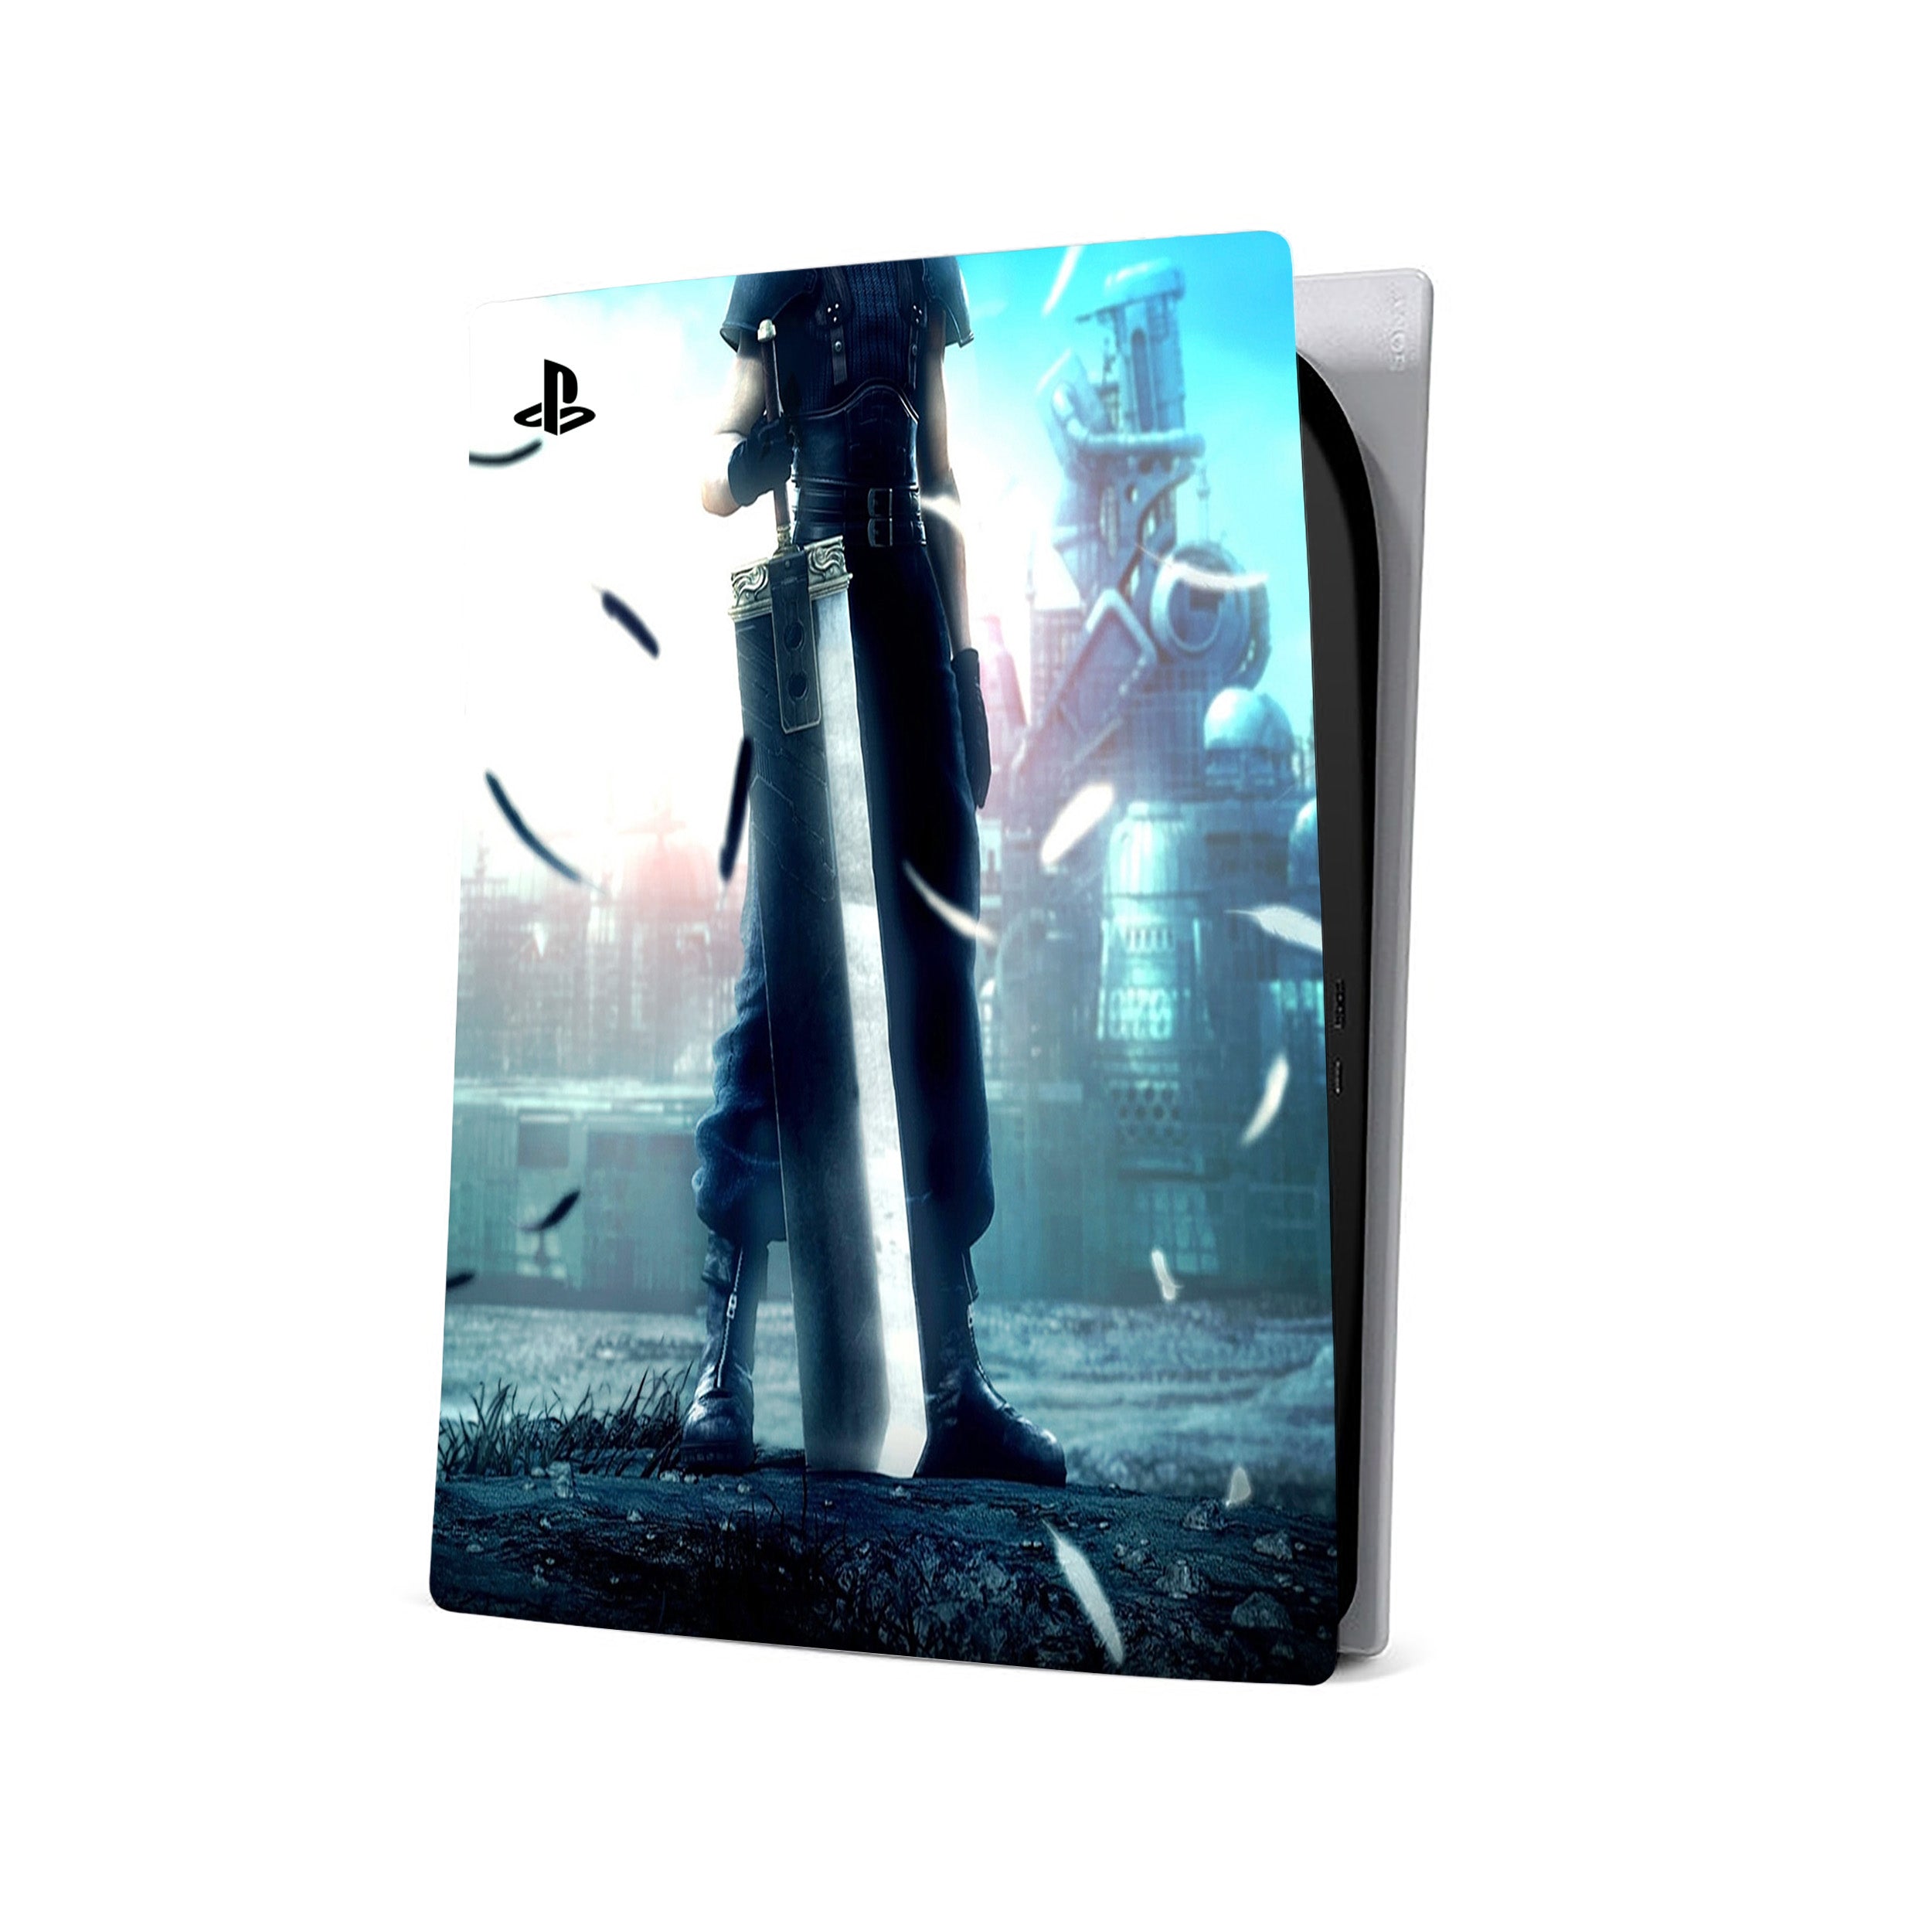 A video game skin featuring a Final Fantasy 7 Cloud And Sephiroth design for the PS5.